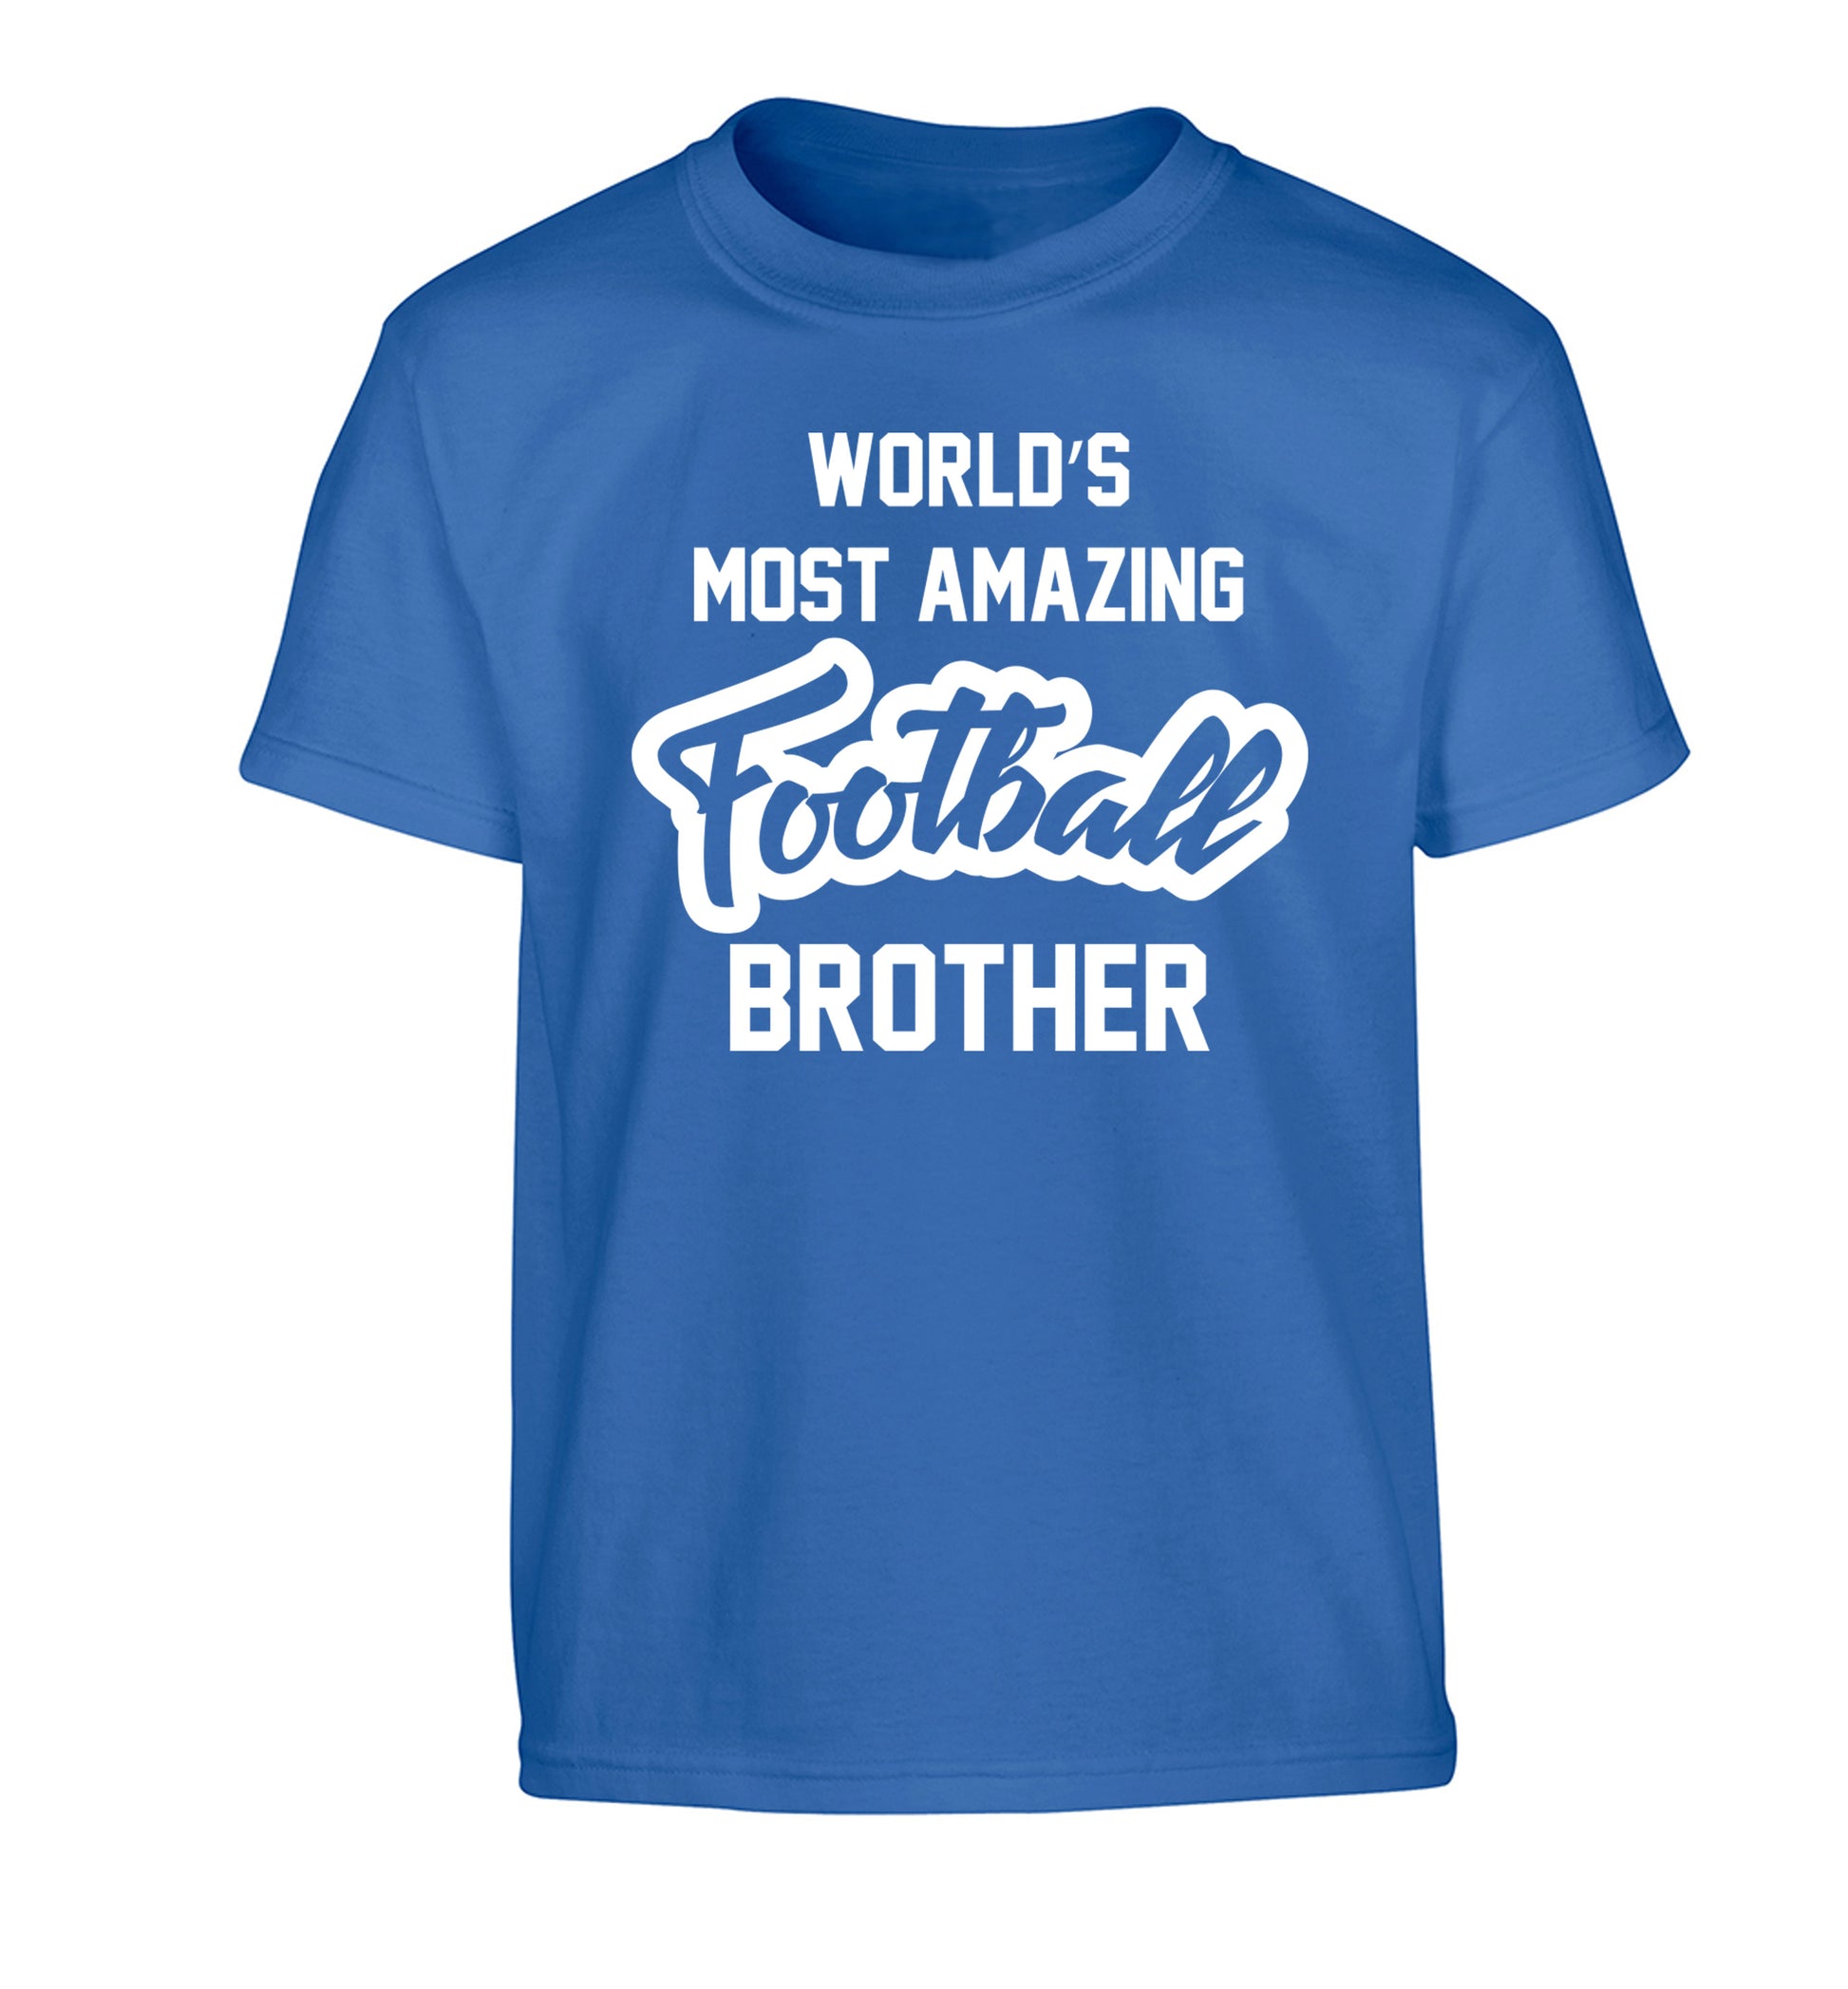 Worlds most amazing football brother Children's blue Tshirt 12-14 Years